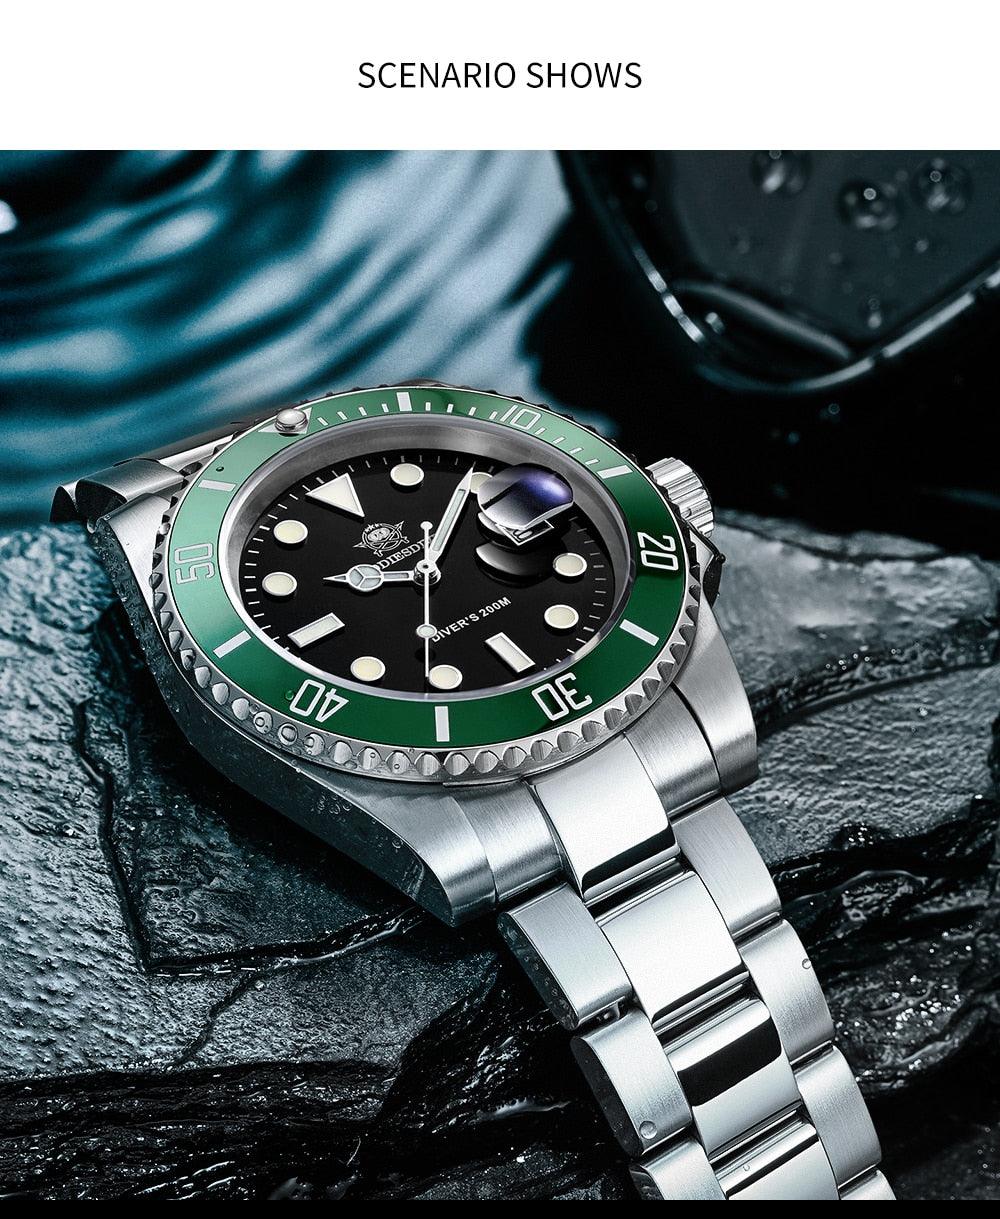 BEST SELLER - Famous Brand 200M C3 Super luminous Sport Luxury Stainless Steel Diver Watch - The Jewellery Supermarket